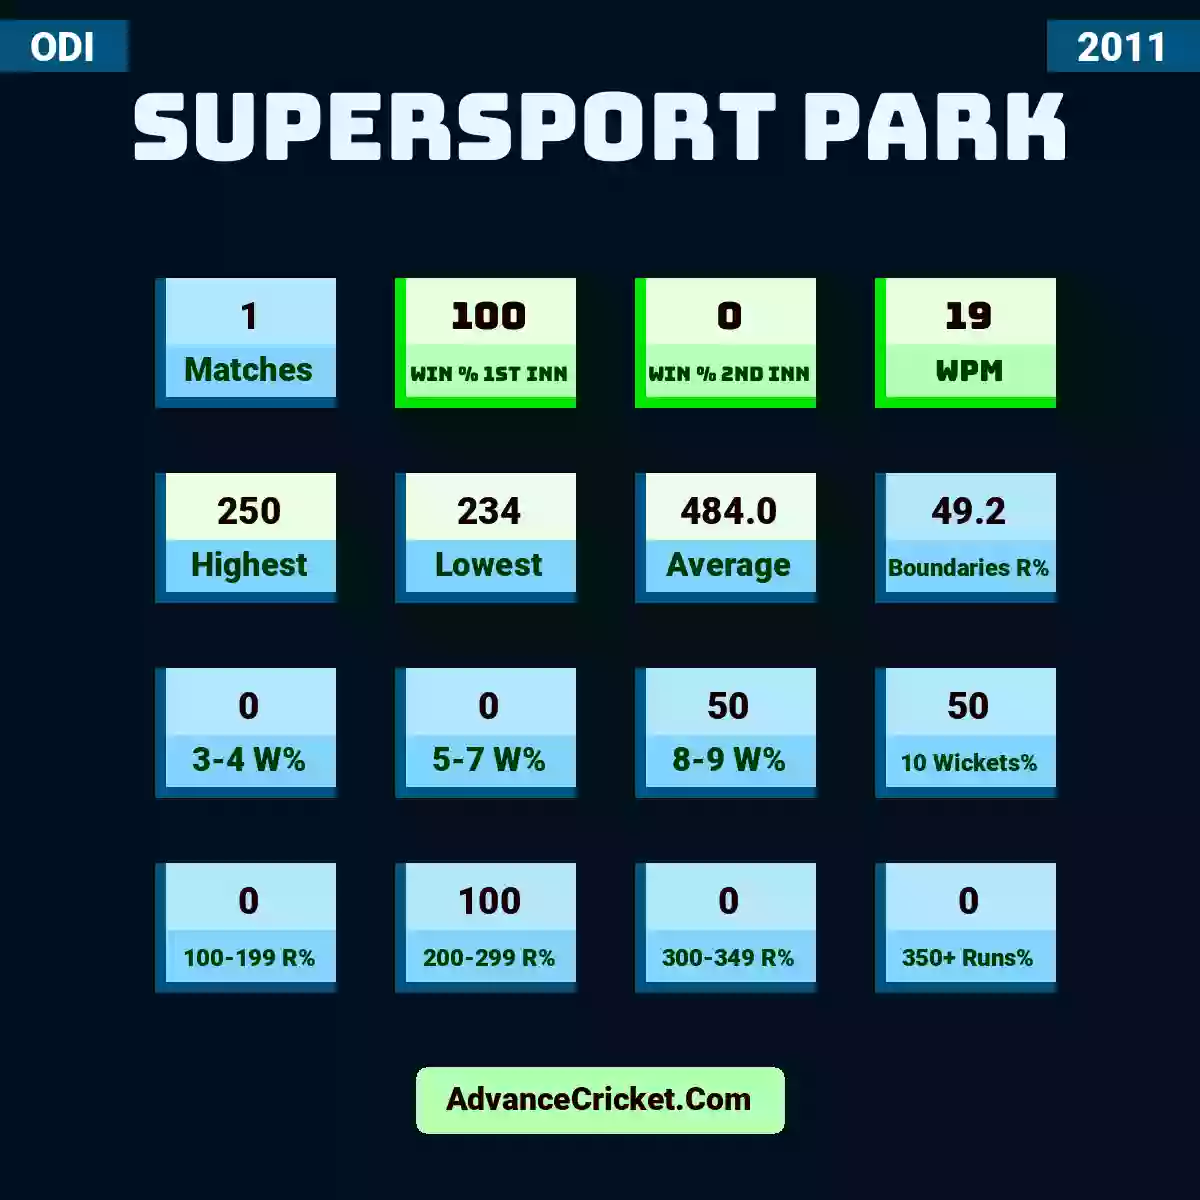 Image showing SuperSport Park with Matches: 1, Win % 1st Inn: 100, Win % 2nd Inn: 0, WPM: 19, Highest: 250, Lowest: 234, Average: 484.0, Boundaries R%: 49.2, 3-4 W%: 0, 5-7 W%: 0, 8-9 W%: 50, 10 Wickets%: 50, 100-199 R%: 0, 200-299 R%: 100, 300-349 R%: 0, 350+ Runs%: 0.